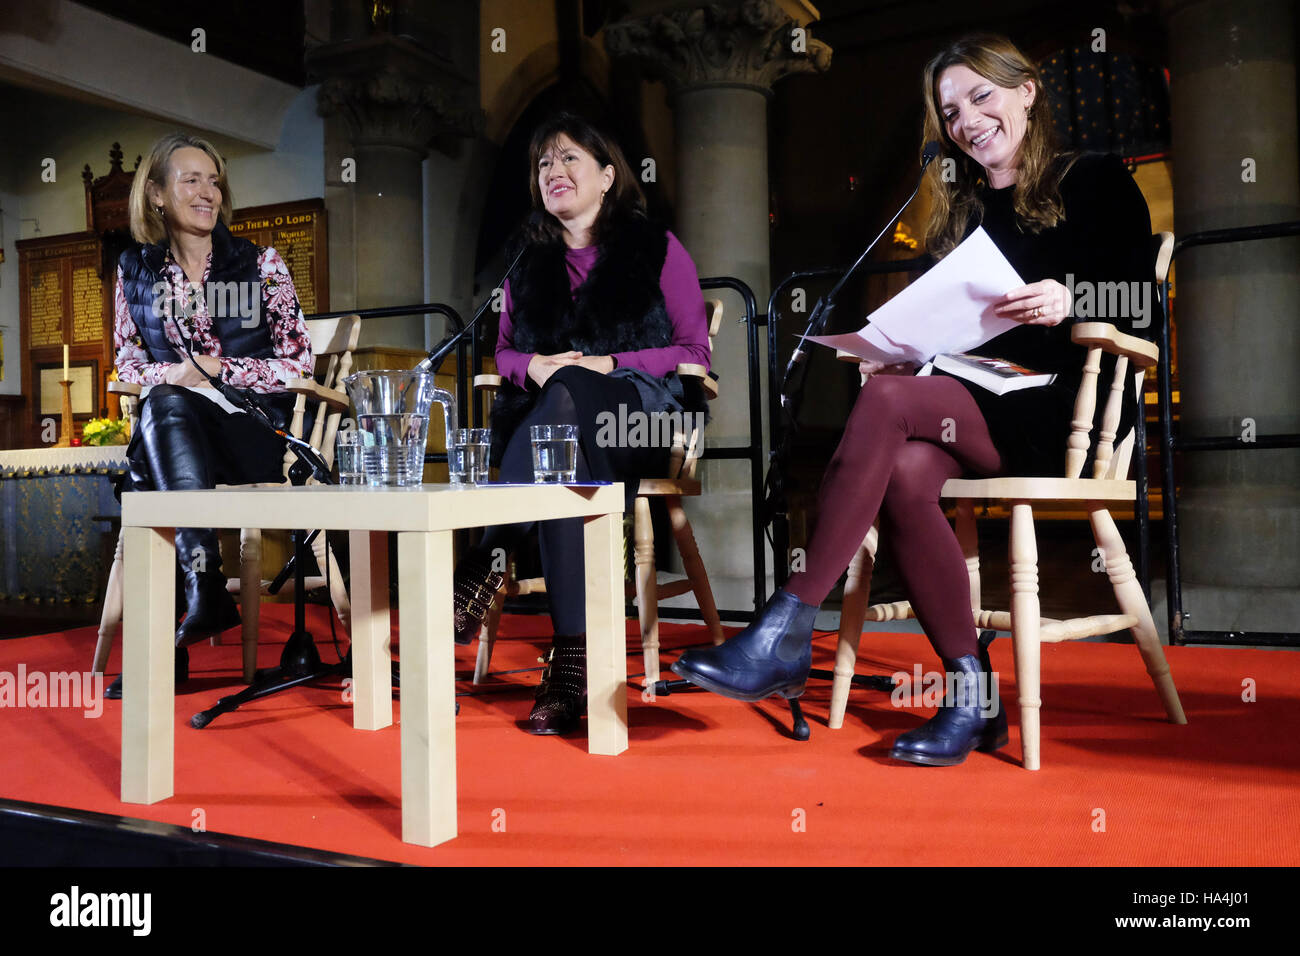 Hay Festival,  Wales, UK - Sunday 27th November 2016 - Actress Anna Wilson Jones ( right ) reads an extract from the book Victoria - A Novel of a Young Queen written by author Daisy Goodwin ( centre ) with Francine Stock on left at the Hay Festival Winter Weekend. Stock Photo